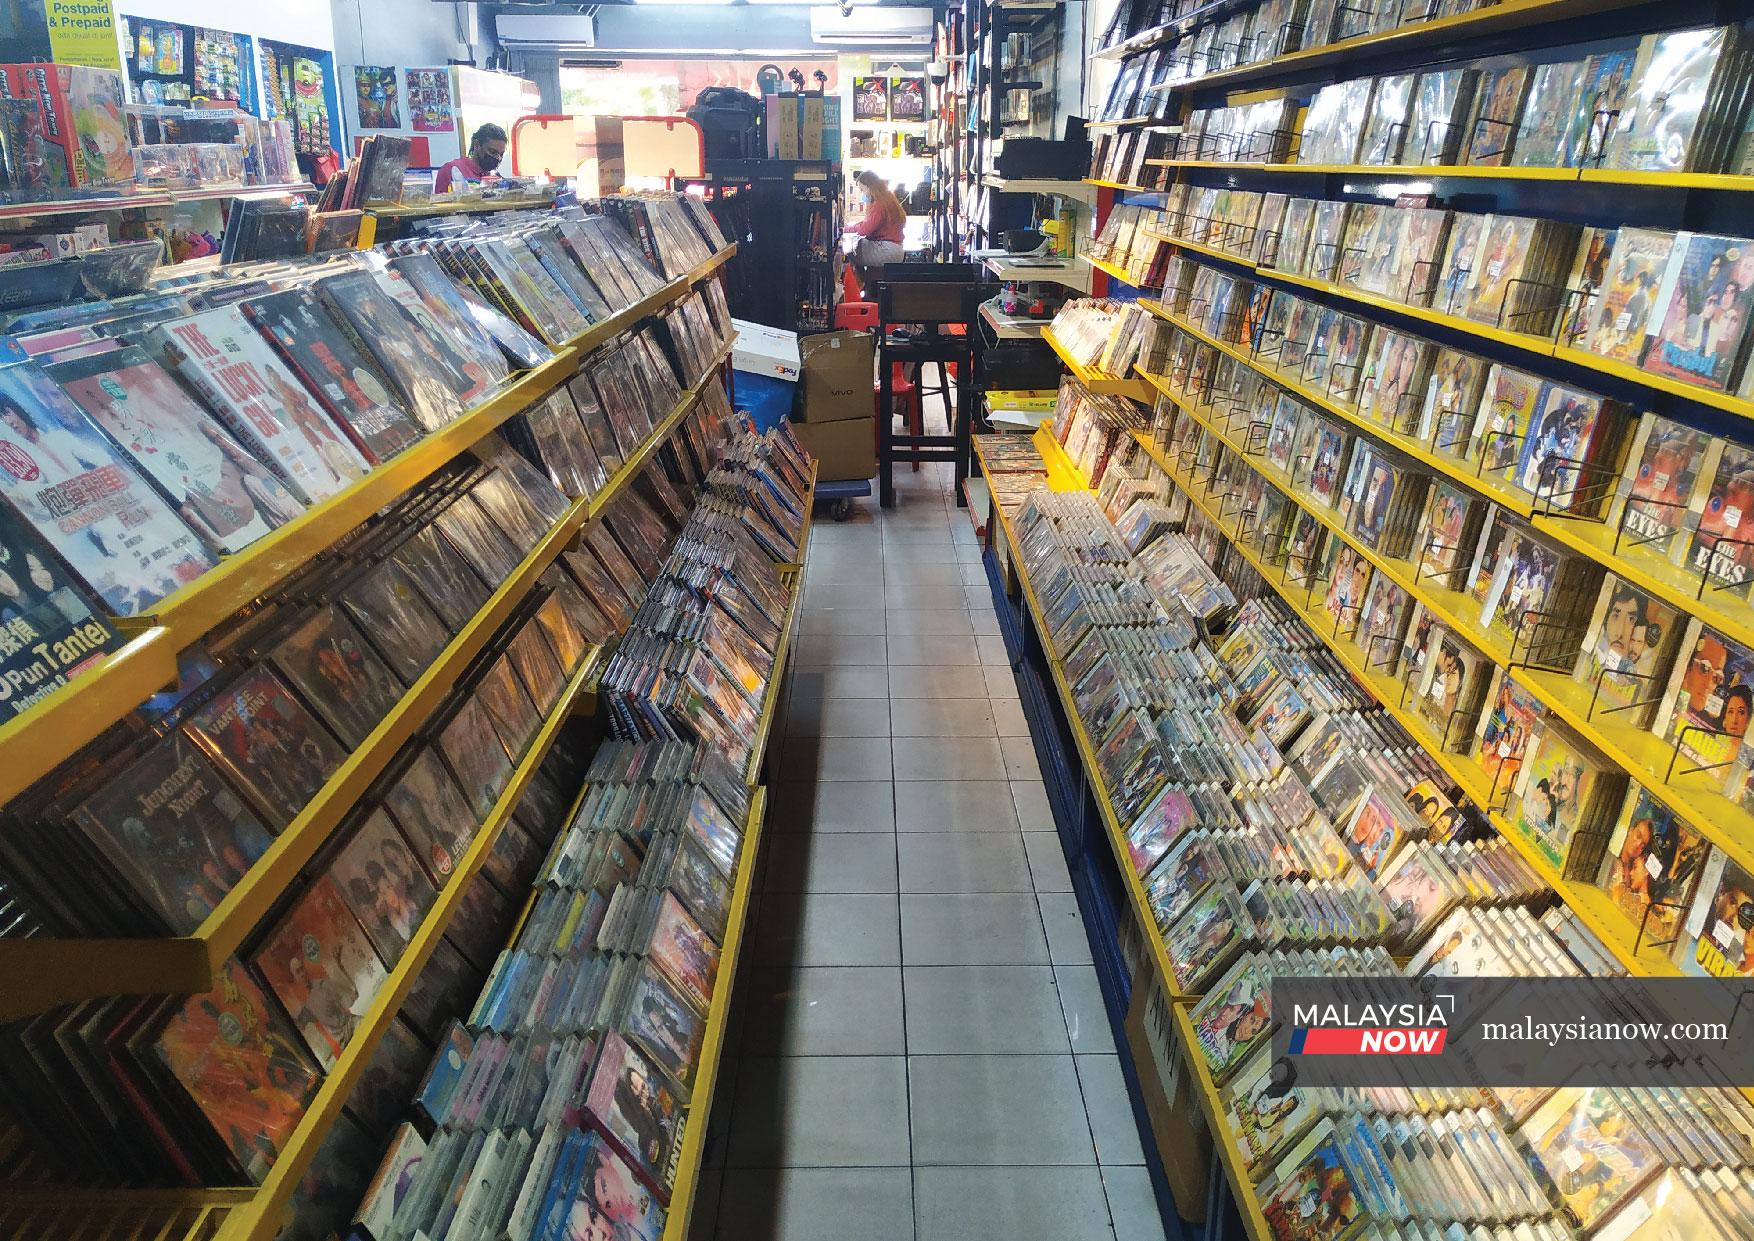 Owners of CD and DVD shops say demand has plunged over the years, exacerbated by the rise of online streaming platforms such as Netflix and Spotify.